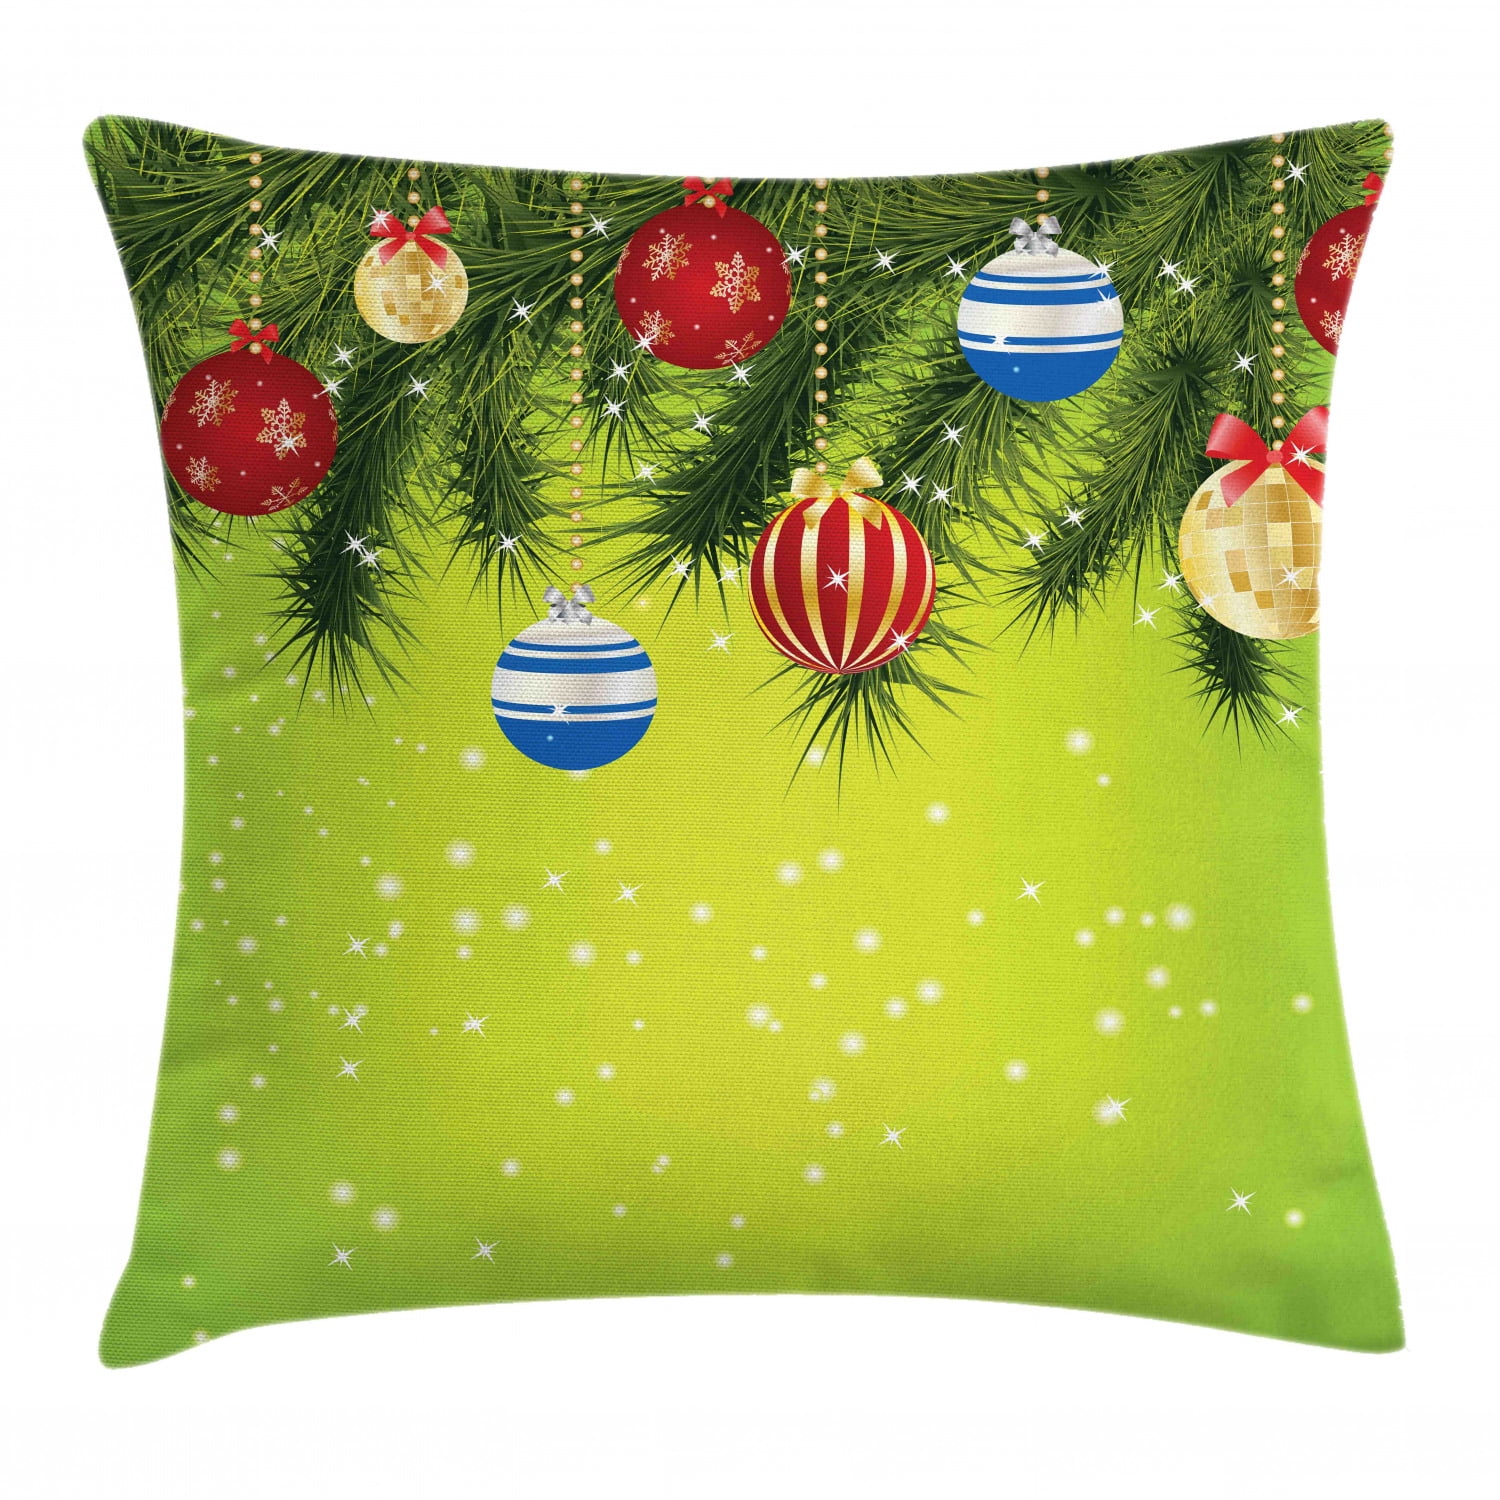 Christmas Throw Pillow Cushion Cover, Hanging Ornaments Branches New Year Celebration Party